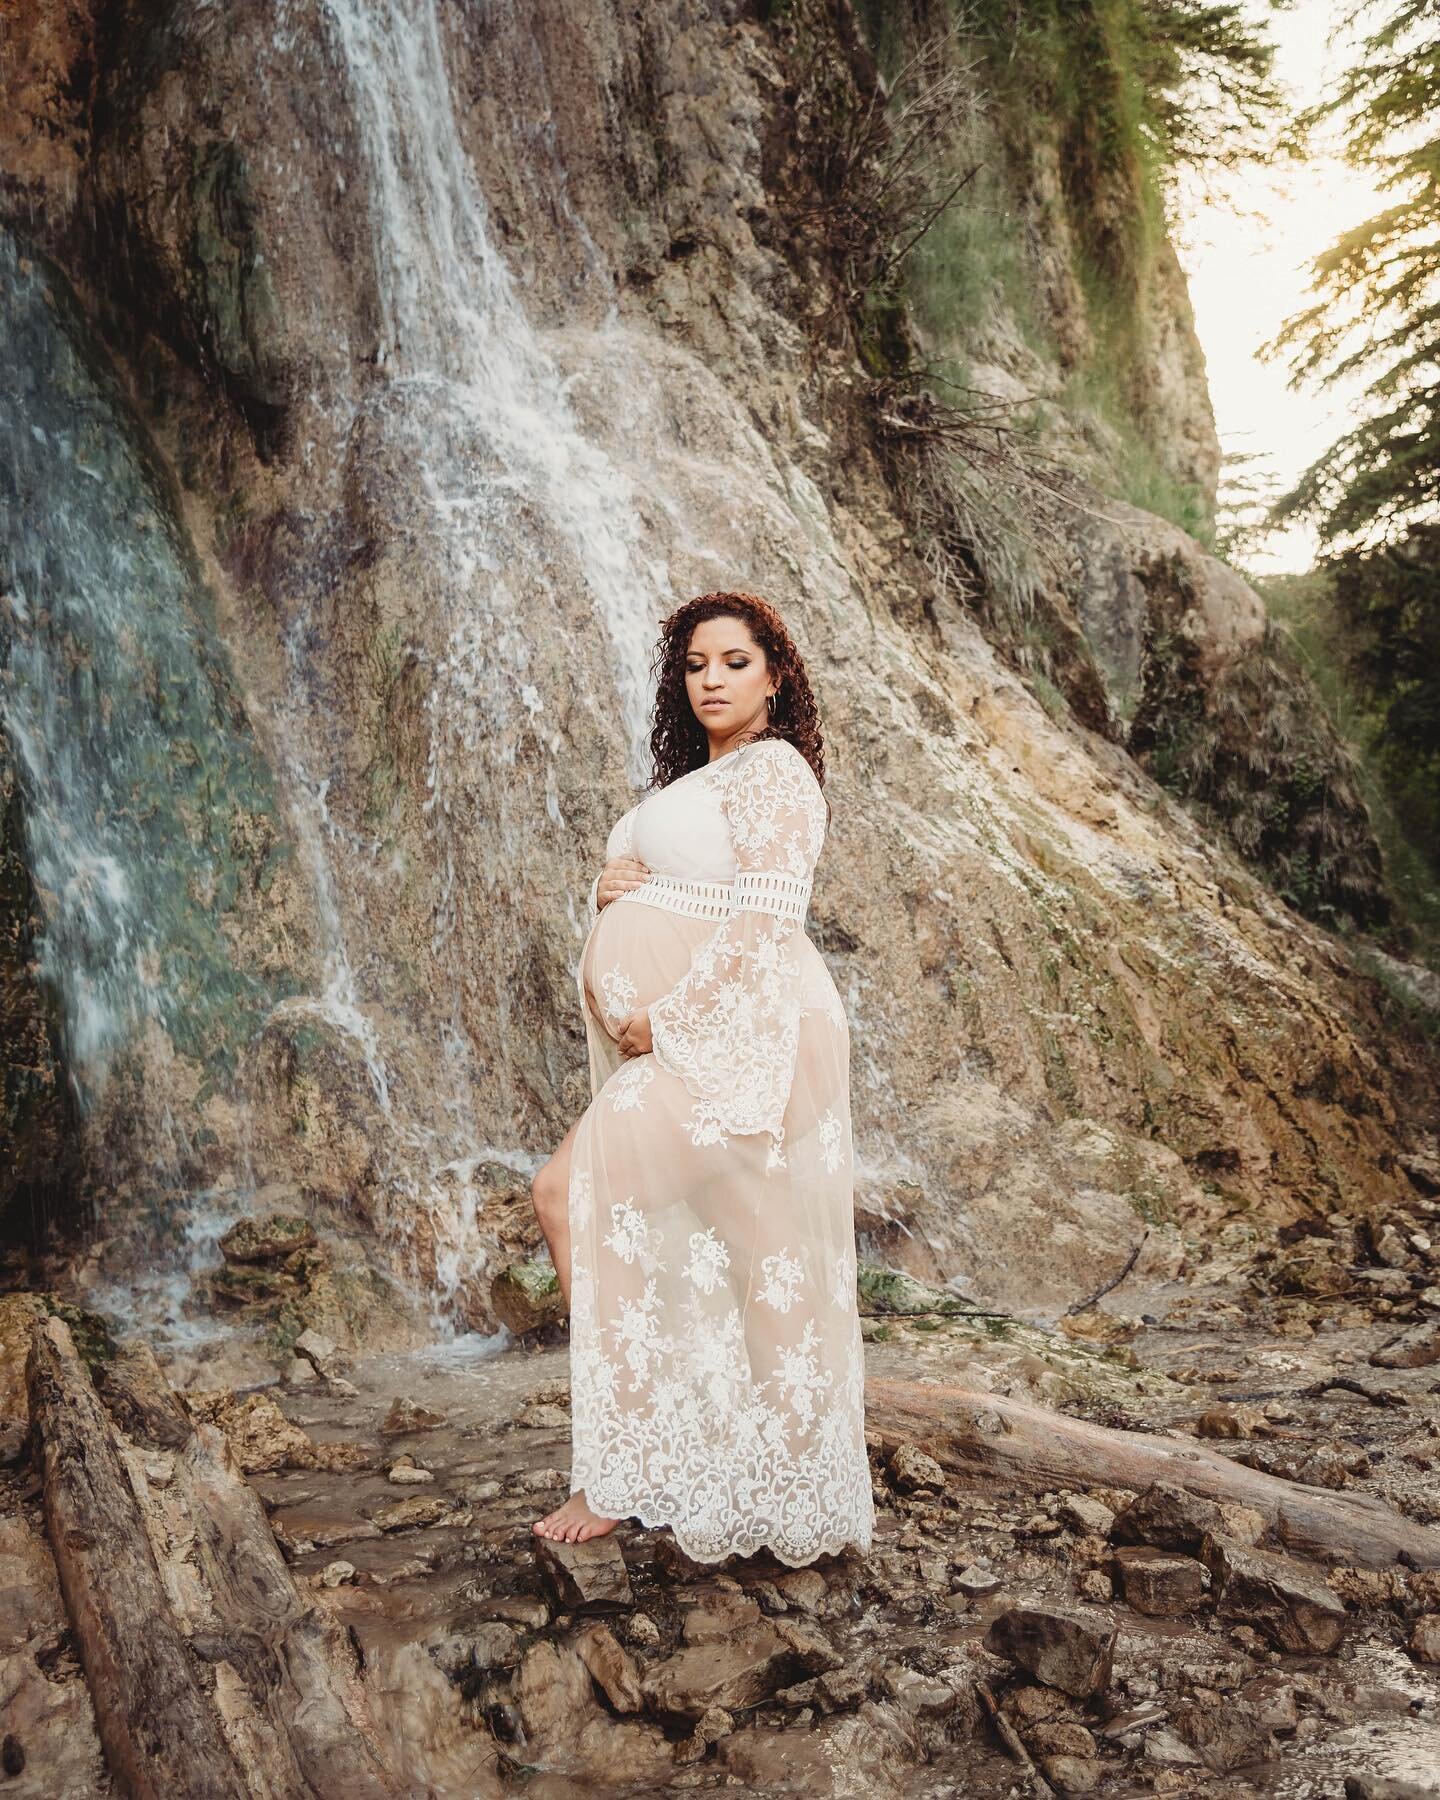 I can&rsquo;t wait to finish this set. Look at this mama isn&rsquo;t she a goddess?😻✨

I am craving a snow cone and I want to know what&rsquo;s your favorite flavor? 🍧
:
:
:
:
:
:
#newmexicophotographer #elpasophotographer #newmexicotravel #newmexi